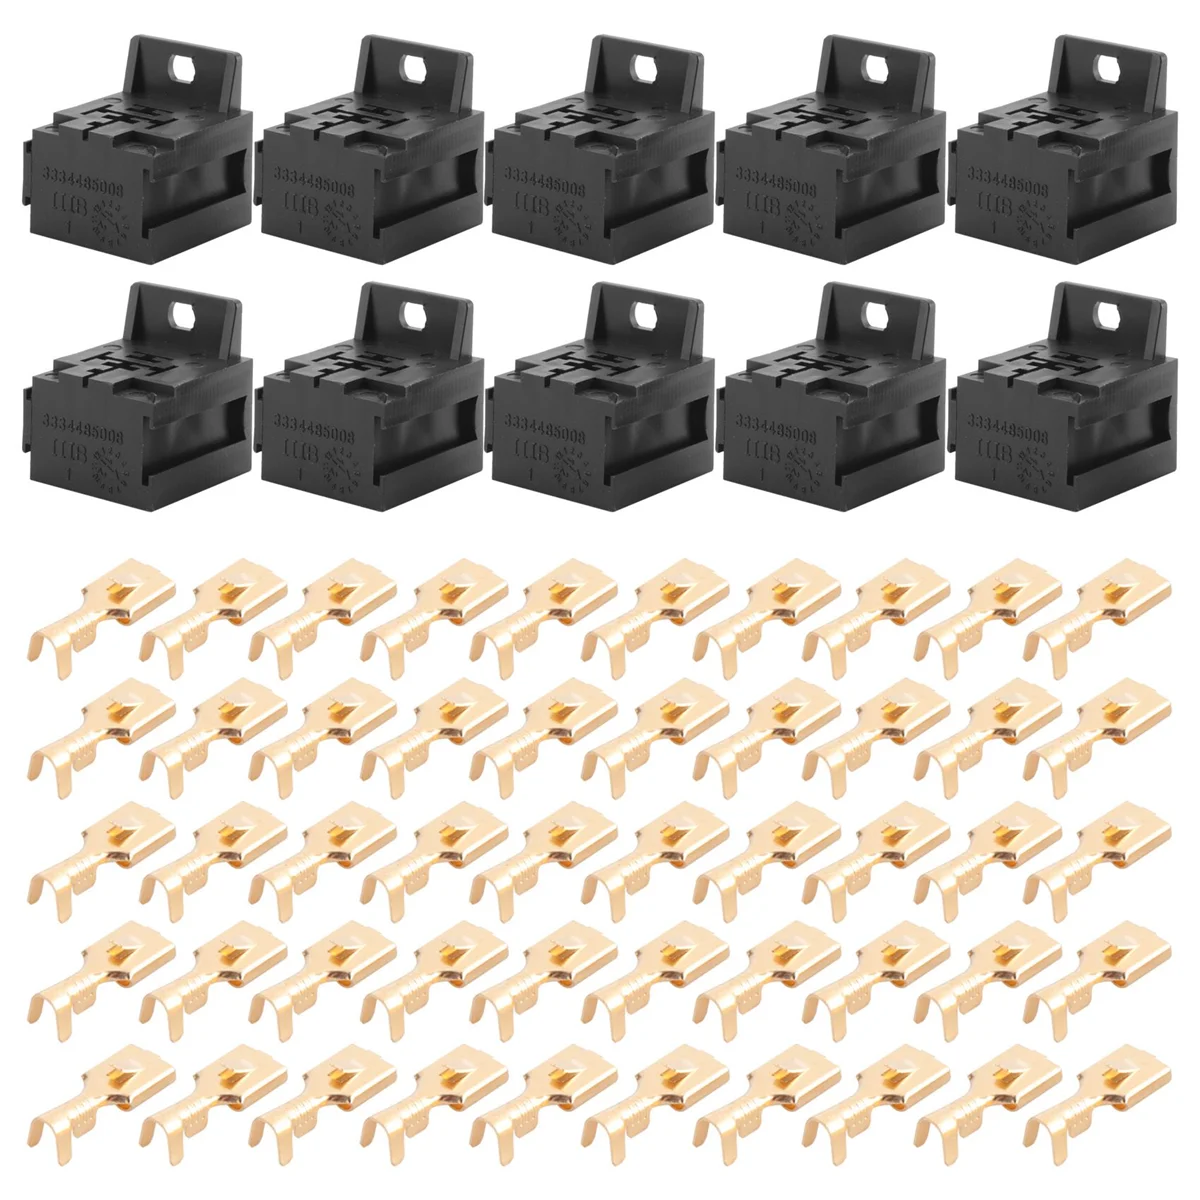 

Car Auto 30A-80A Relay Bracket Terminal Case Holder Relay Base Holder 5 Pin Socket with 50Pcs 6.3mm Terminals for Car